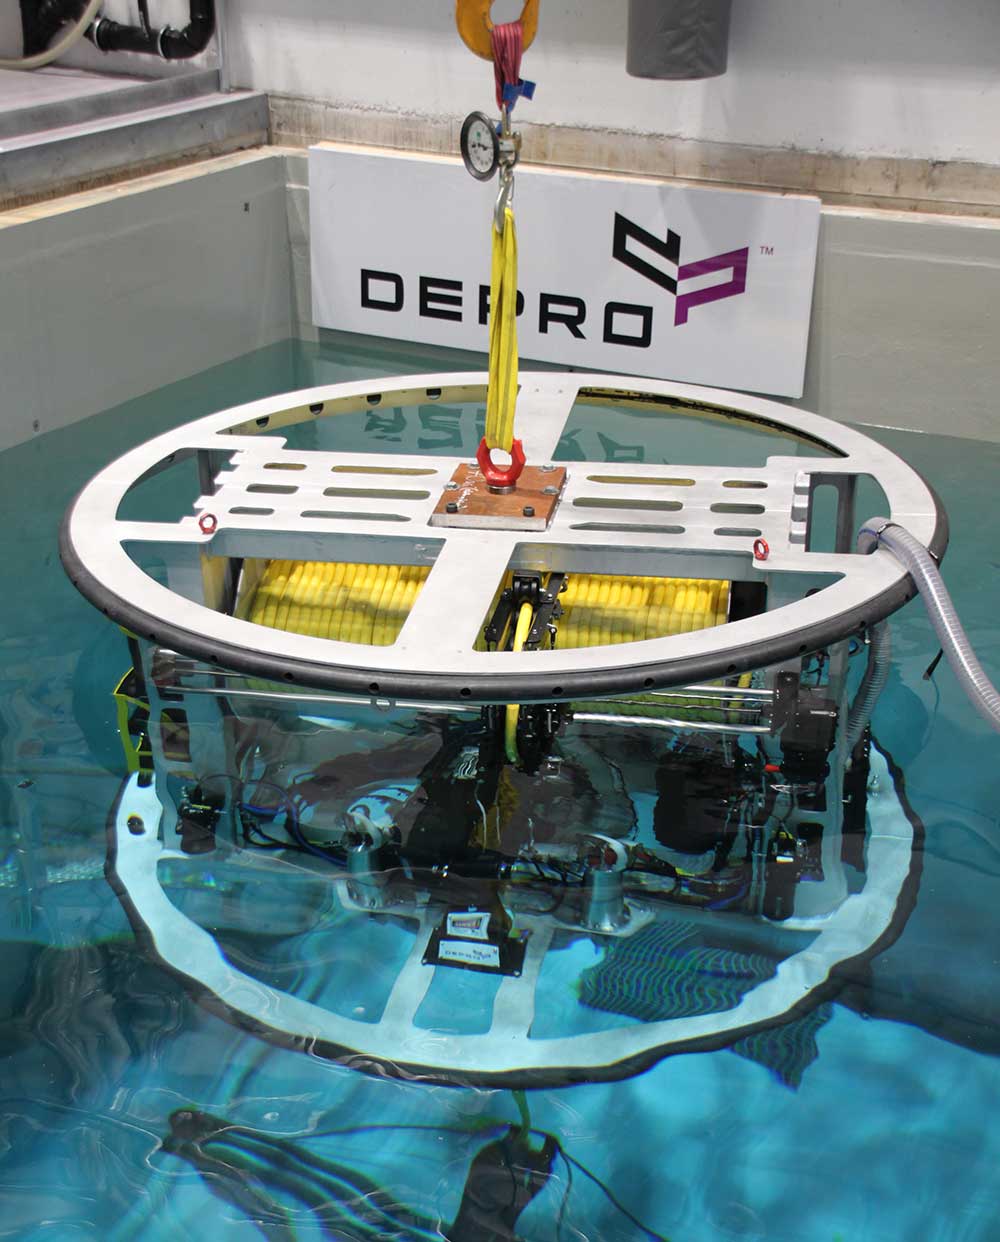 Third generation ETMS that is immersed in Depro's test pool.